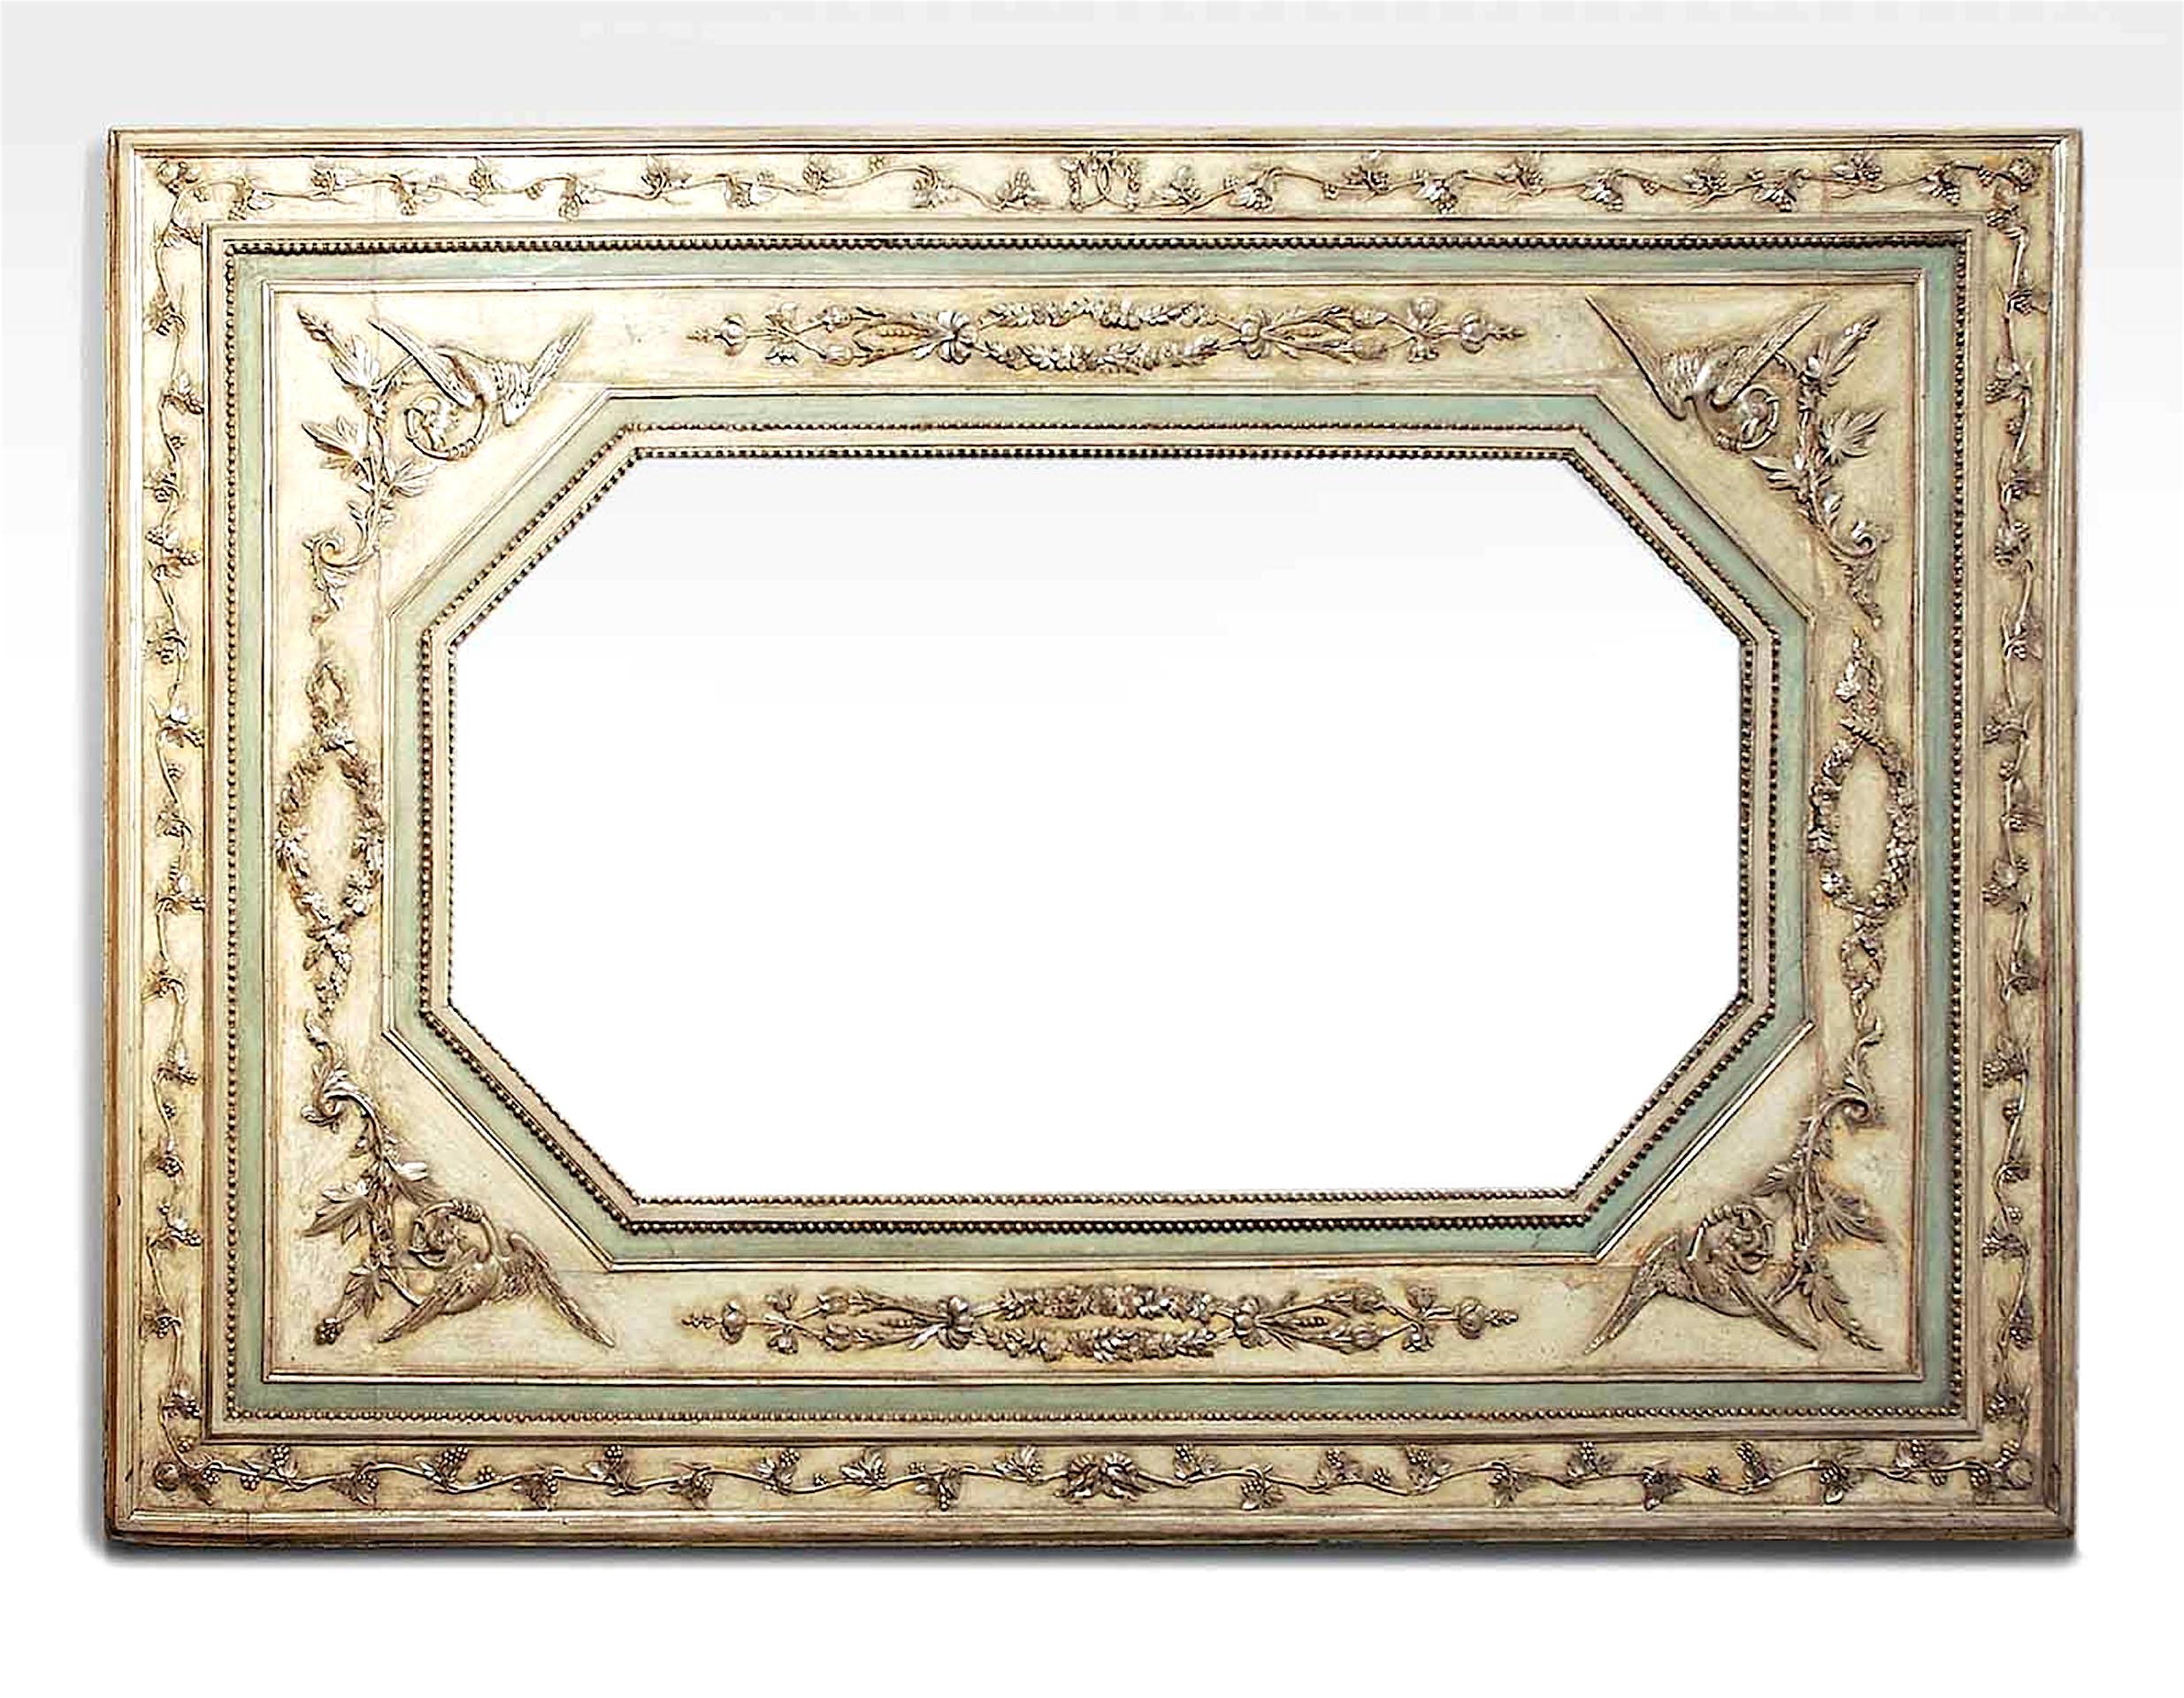 Italian Neoclassic (18th Century) white painted and celadon trimmed wall mirror with carved silver gilt floral decorations and border with an octagonal inset mirror.
